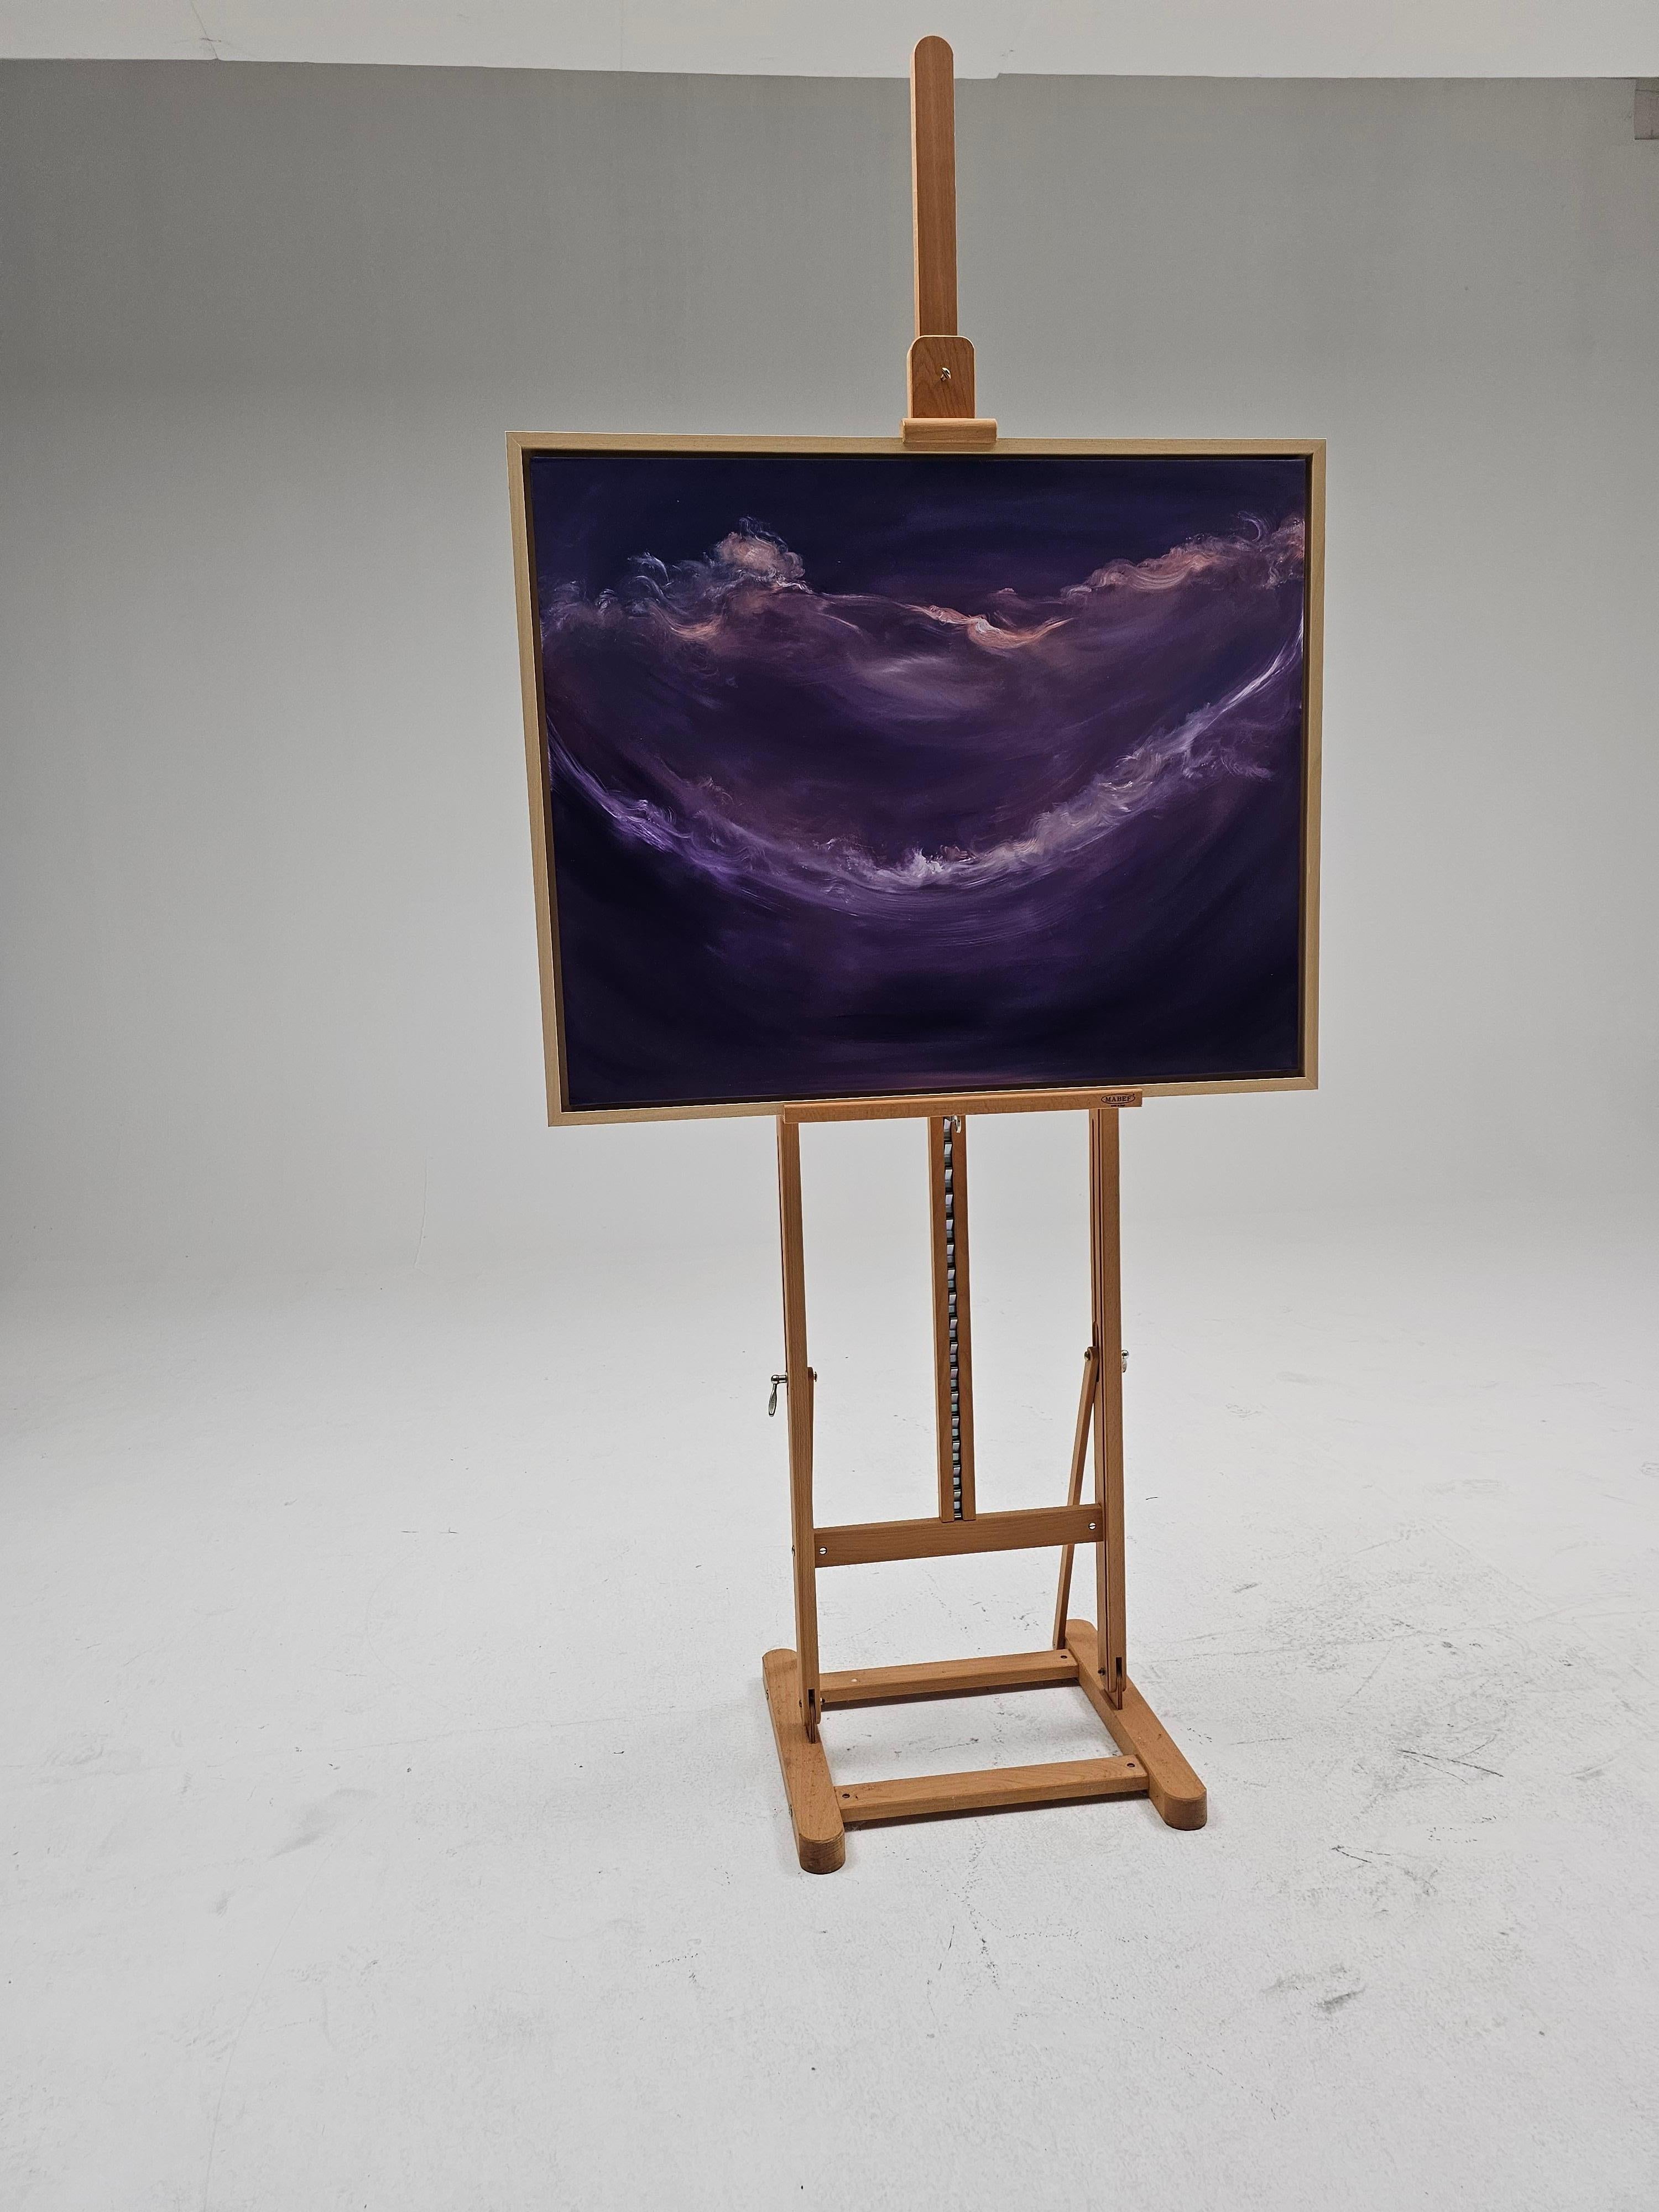 An abstract violet night sky painting, 